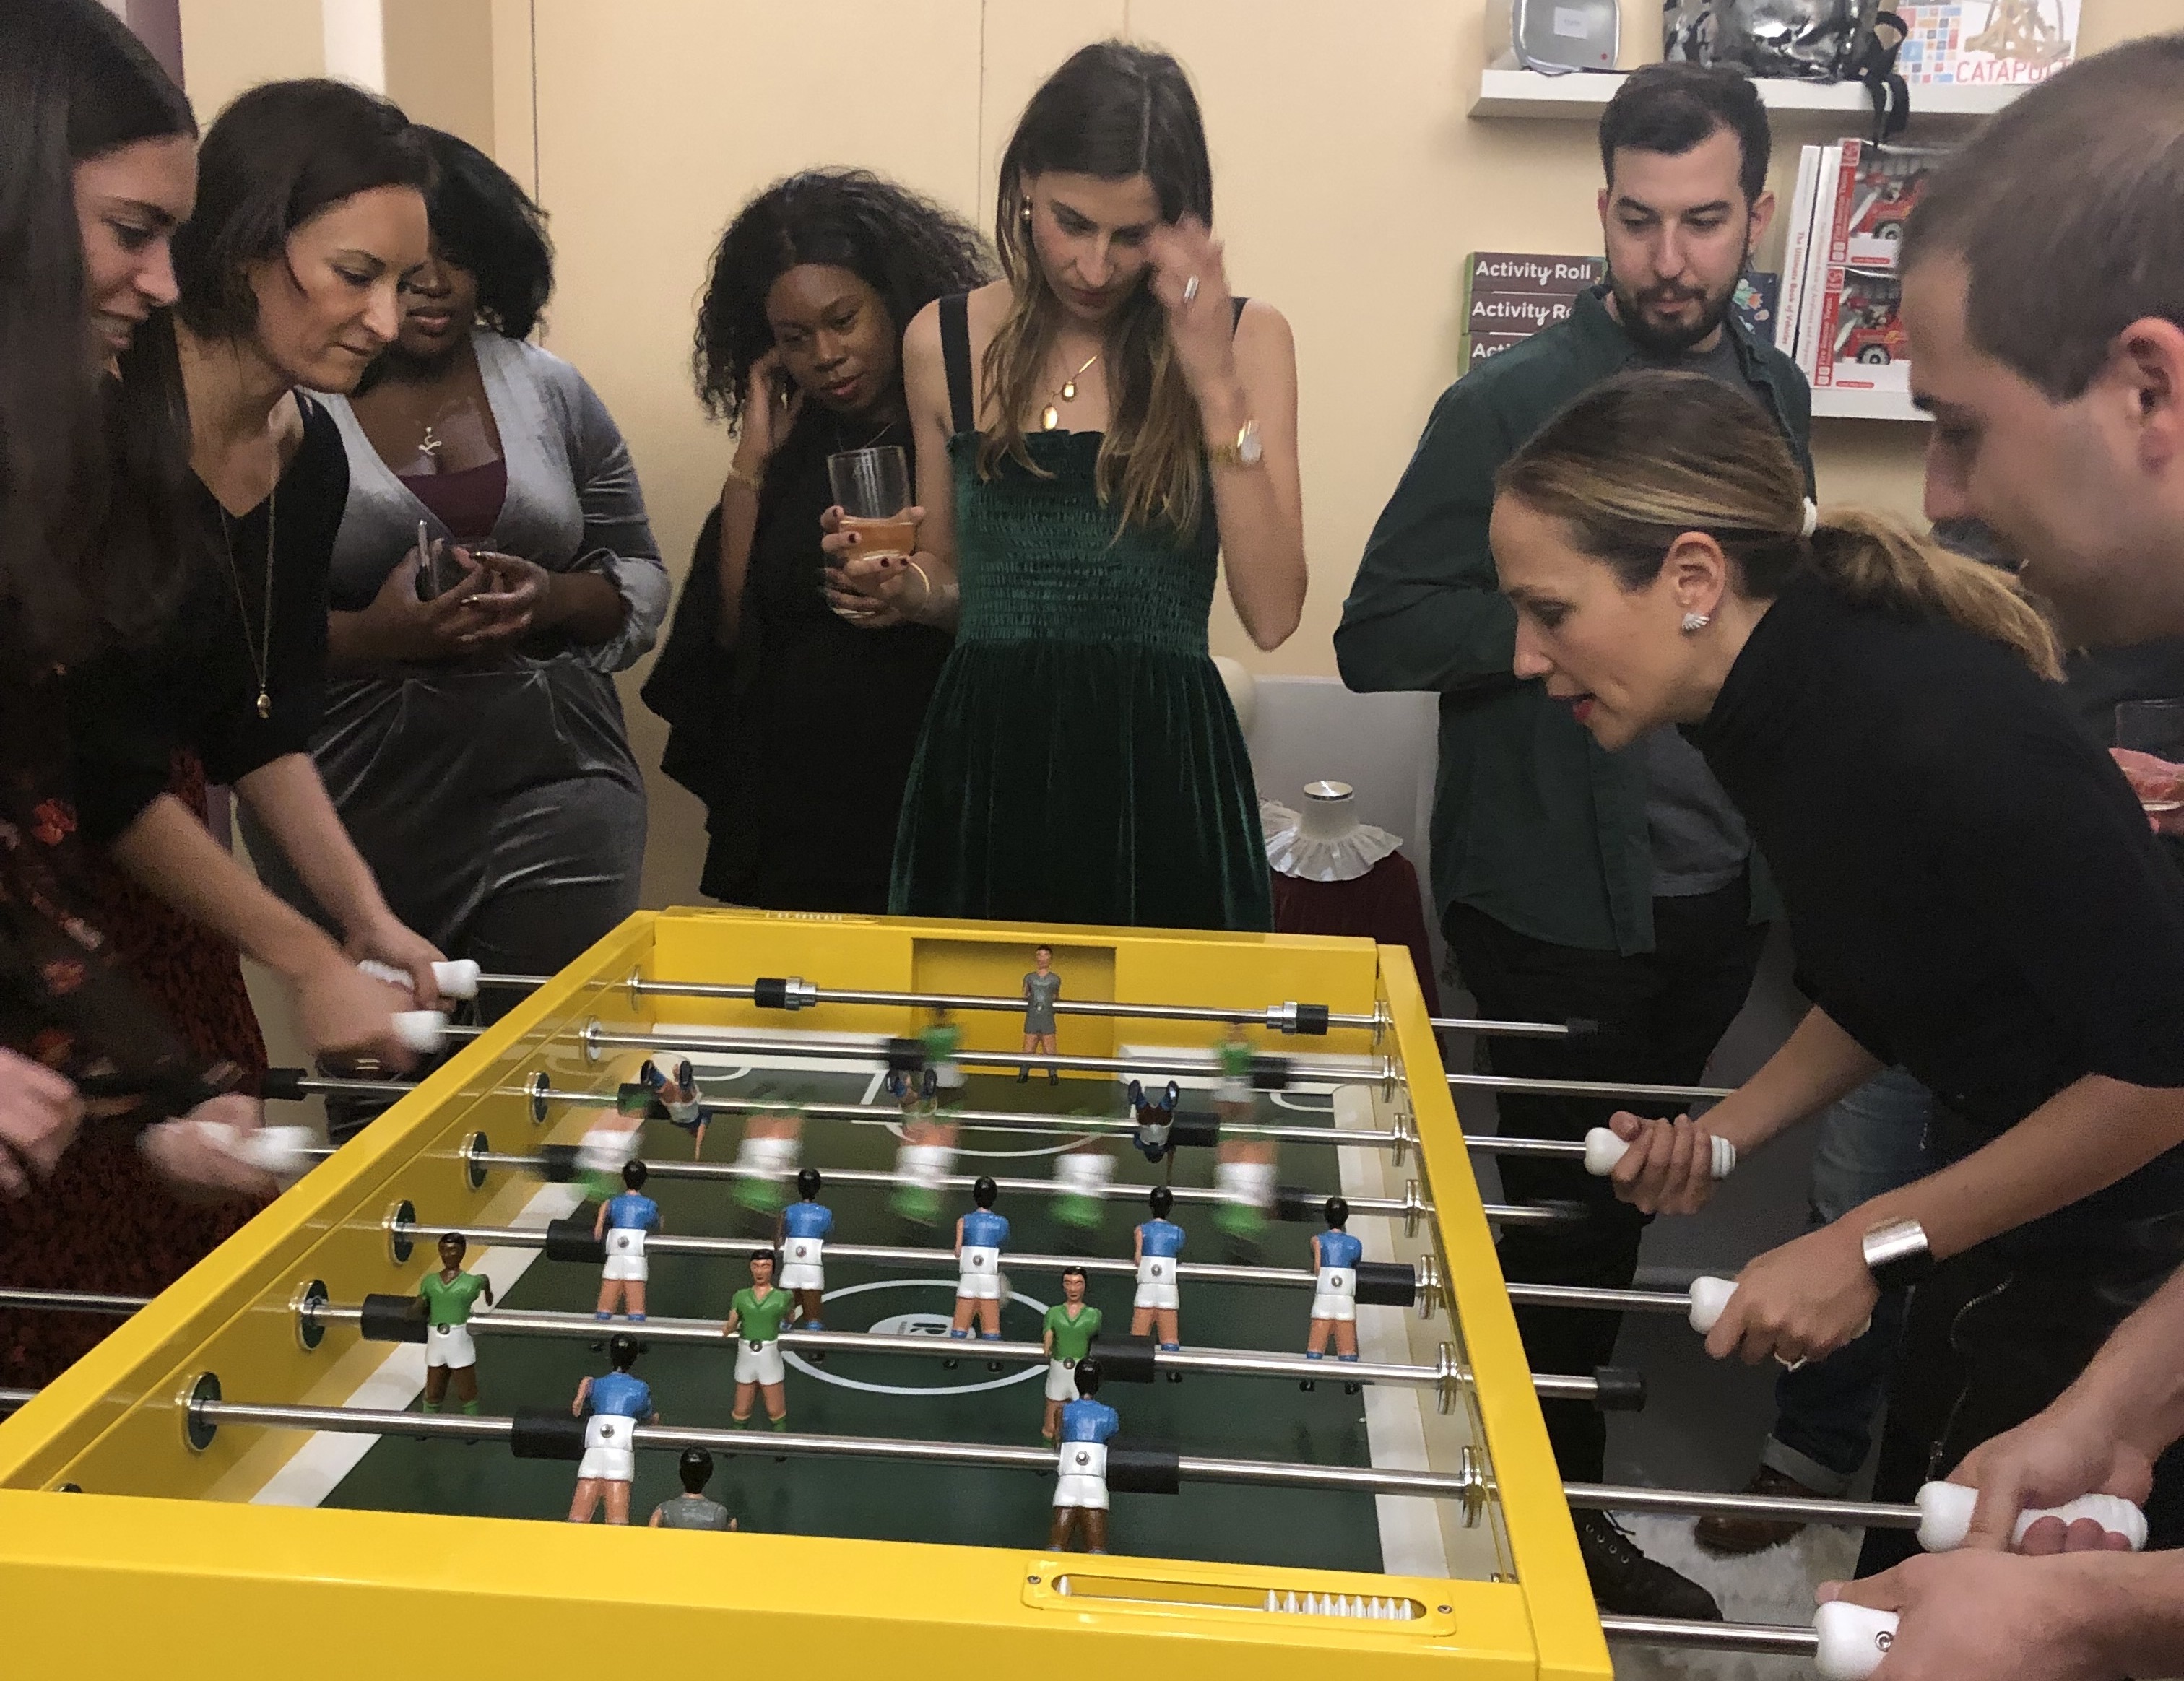 A group of Maisonette employees play foosball together.